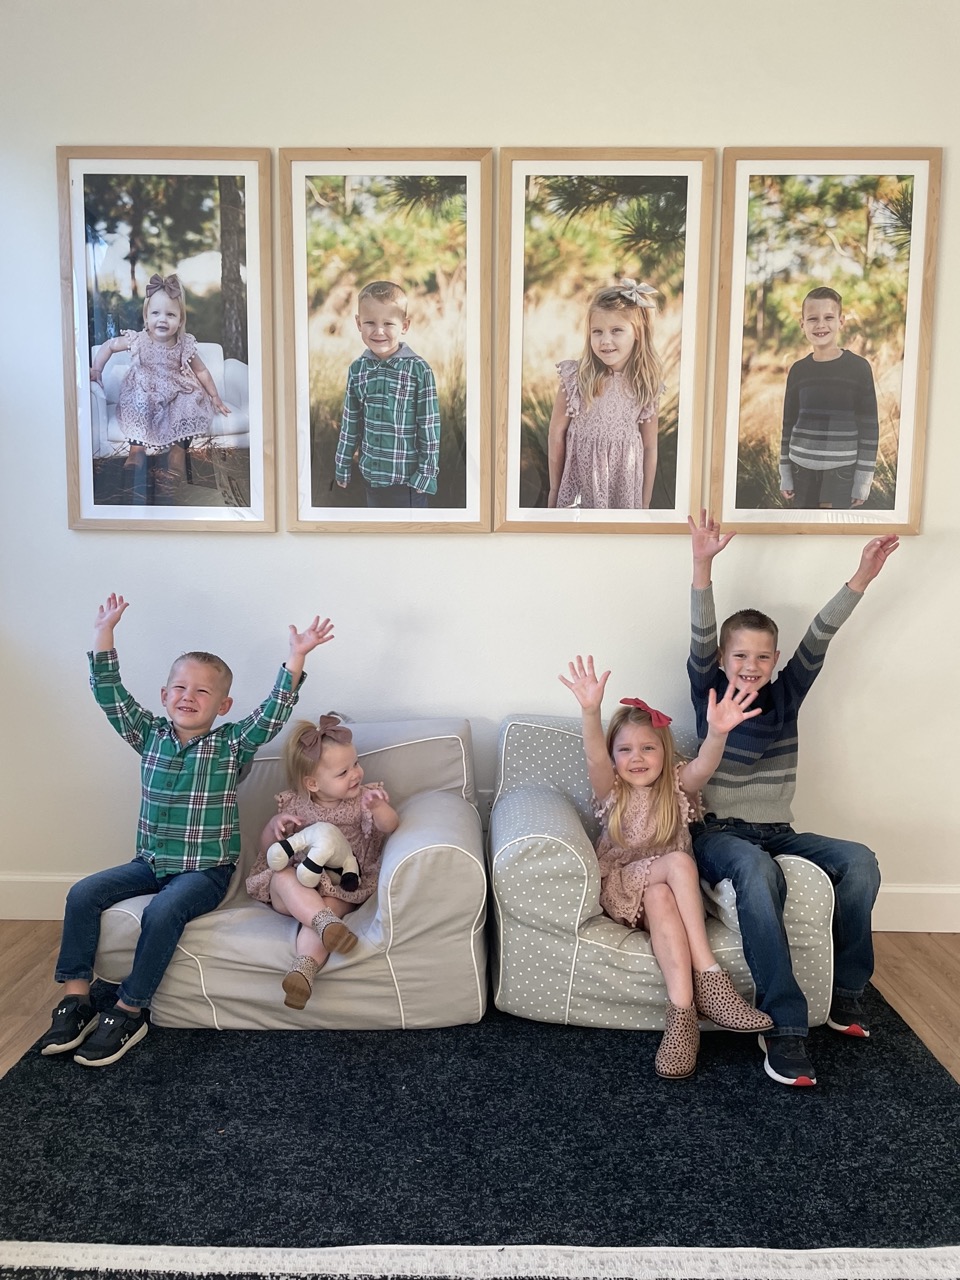 Family Photos And Frame Inspiration For Making A House Feel Like Home -  Frame It Easy